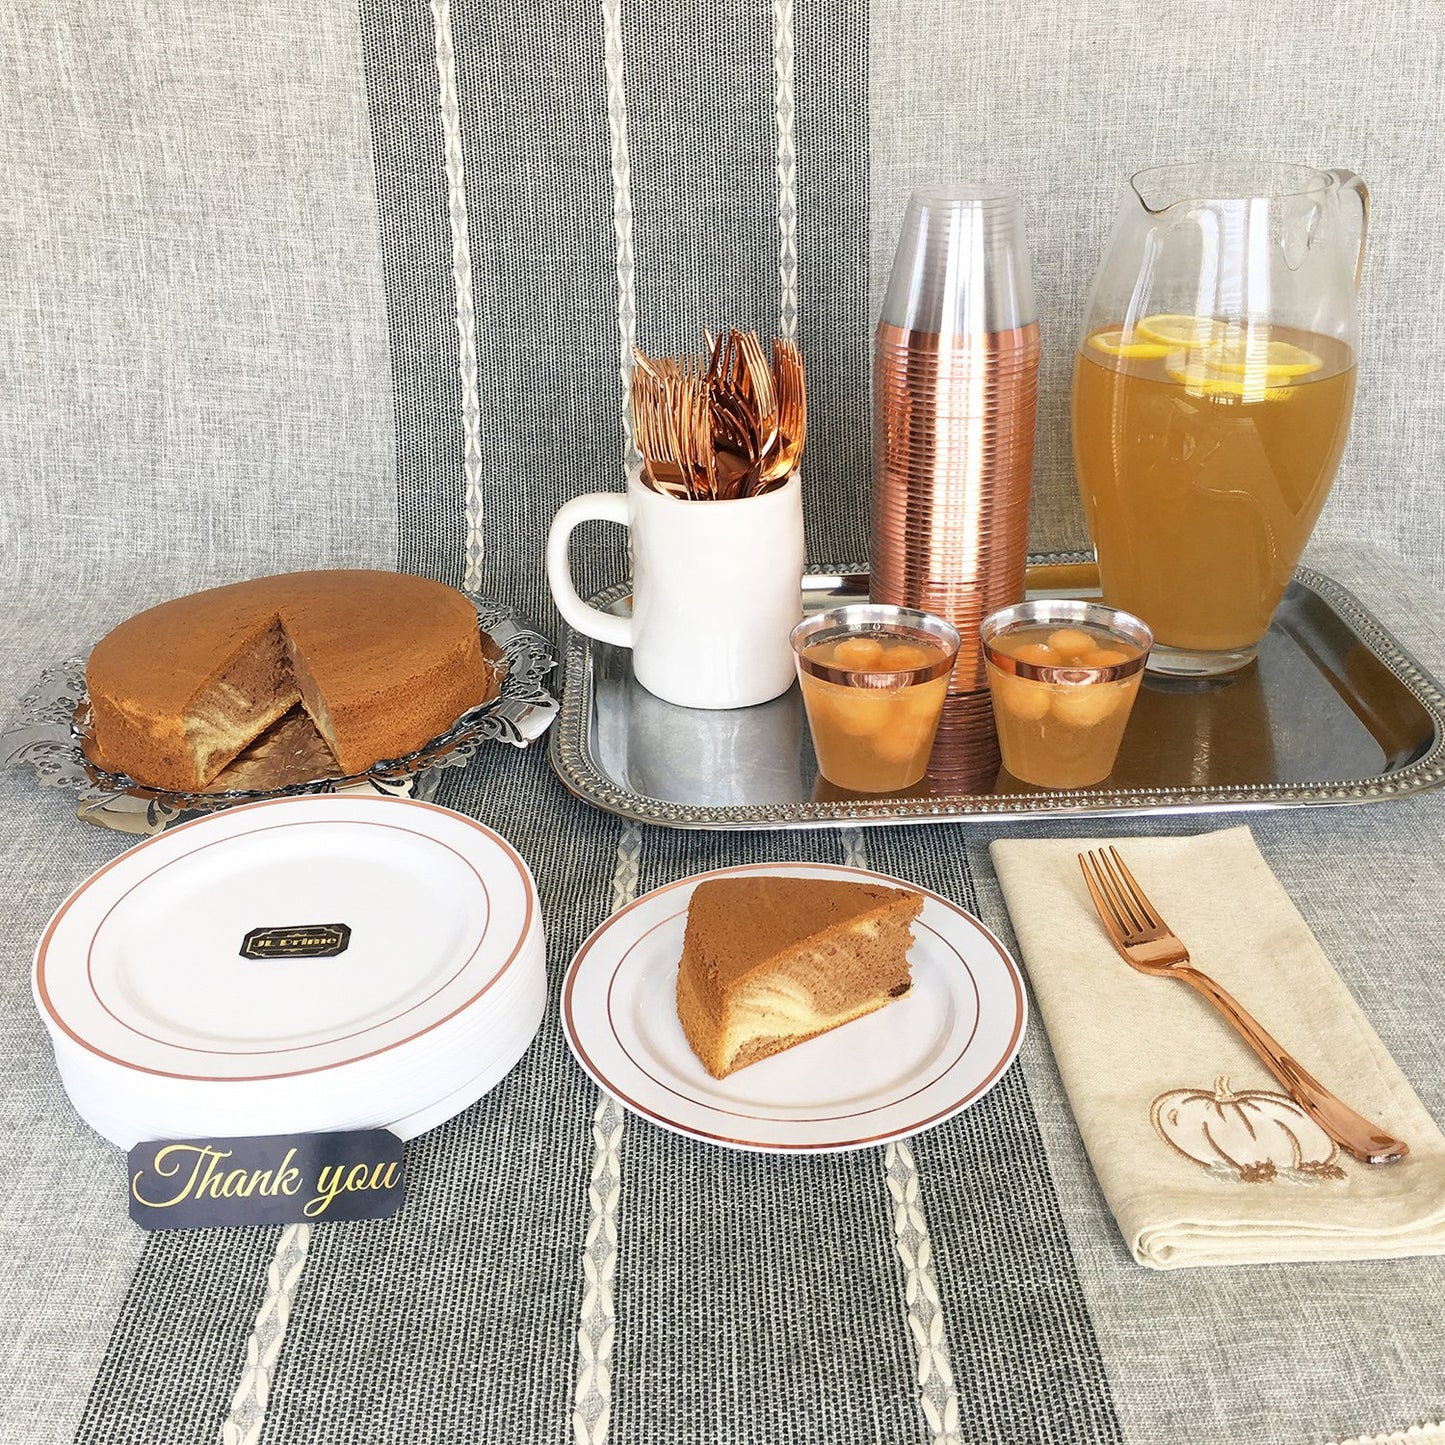 JL Prime 125 Piece Rose Gold Plastic Plates & Cutlery Set, Heavy Duty Disposable Plastic Plates with Rose Gold Rim & Silverware, 25 Dinner Plates, 25 Salad Plates, 25 Forks, 25 Knives, 25 Spoons